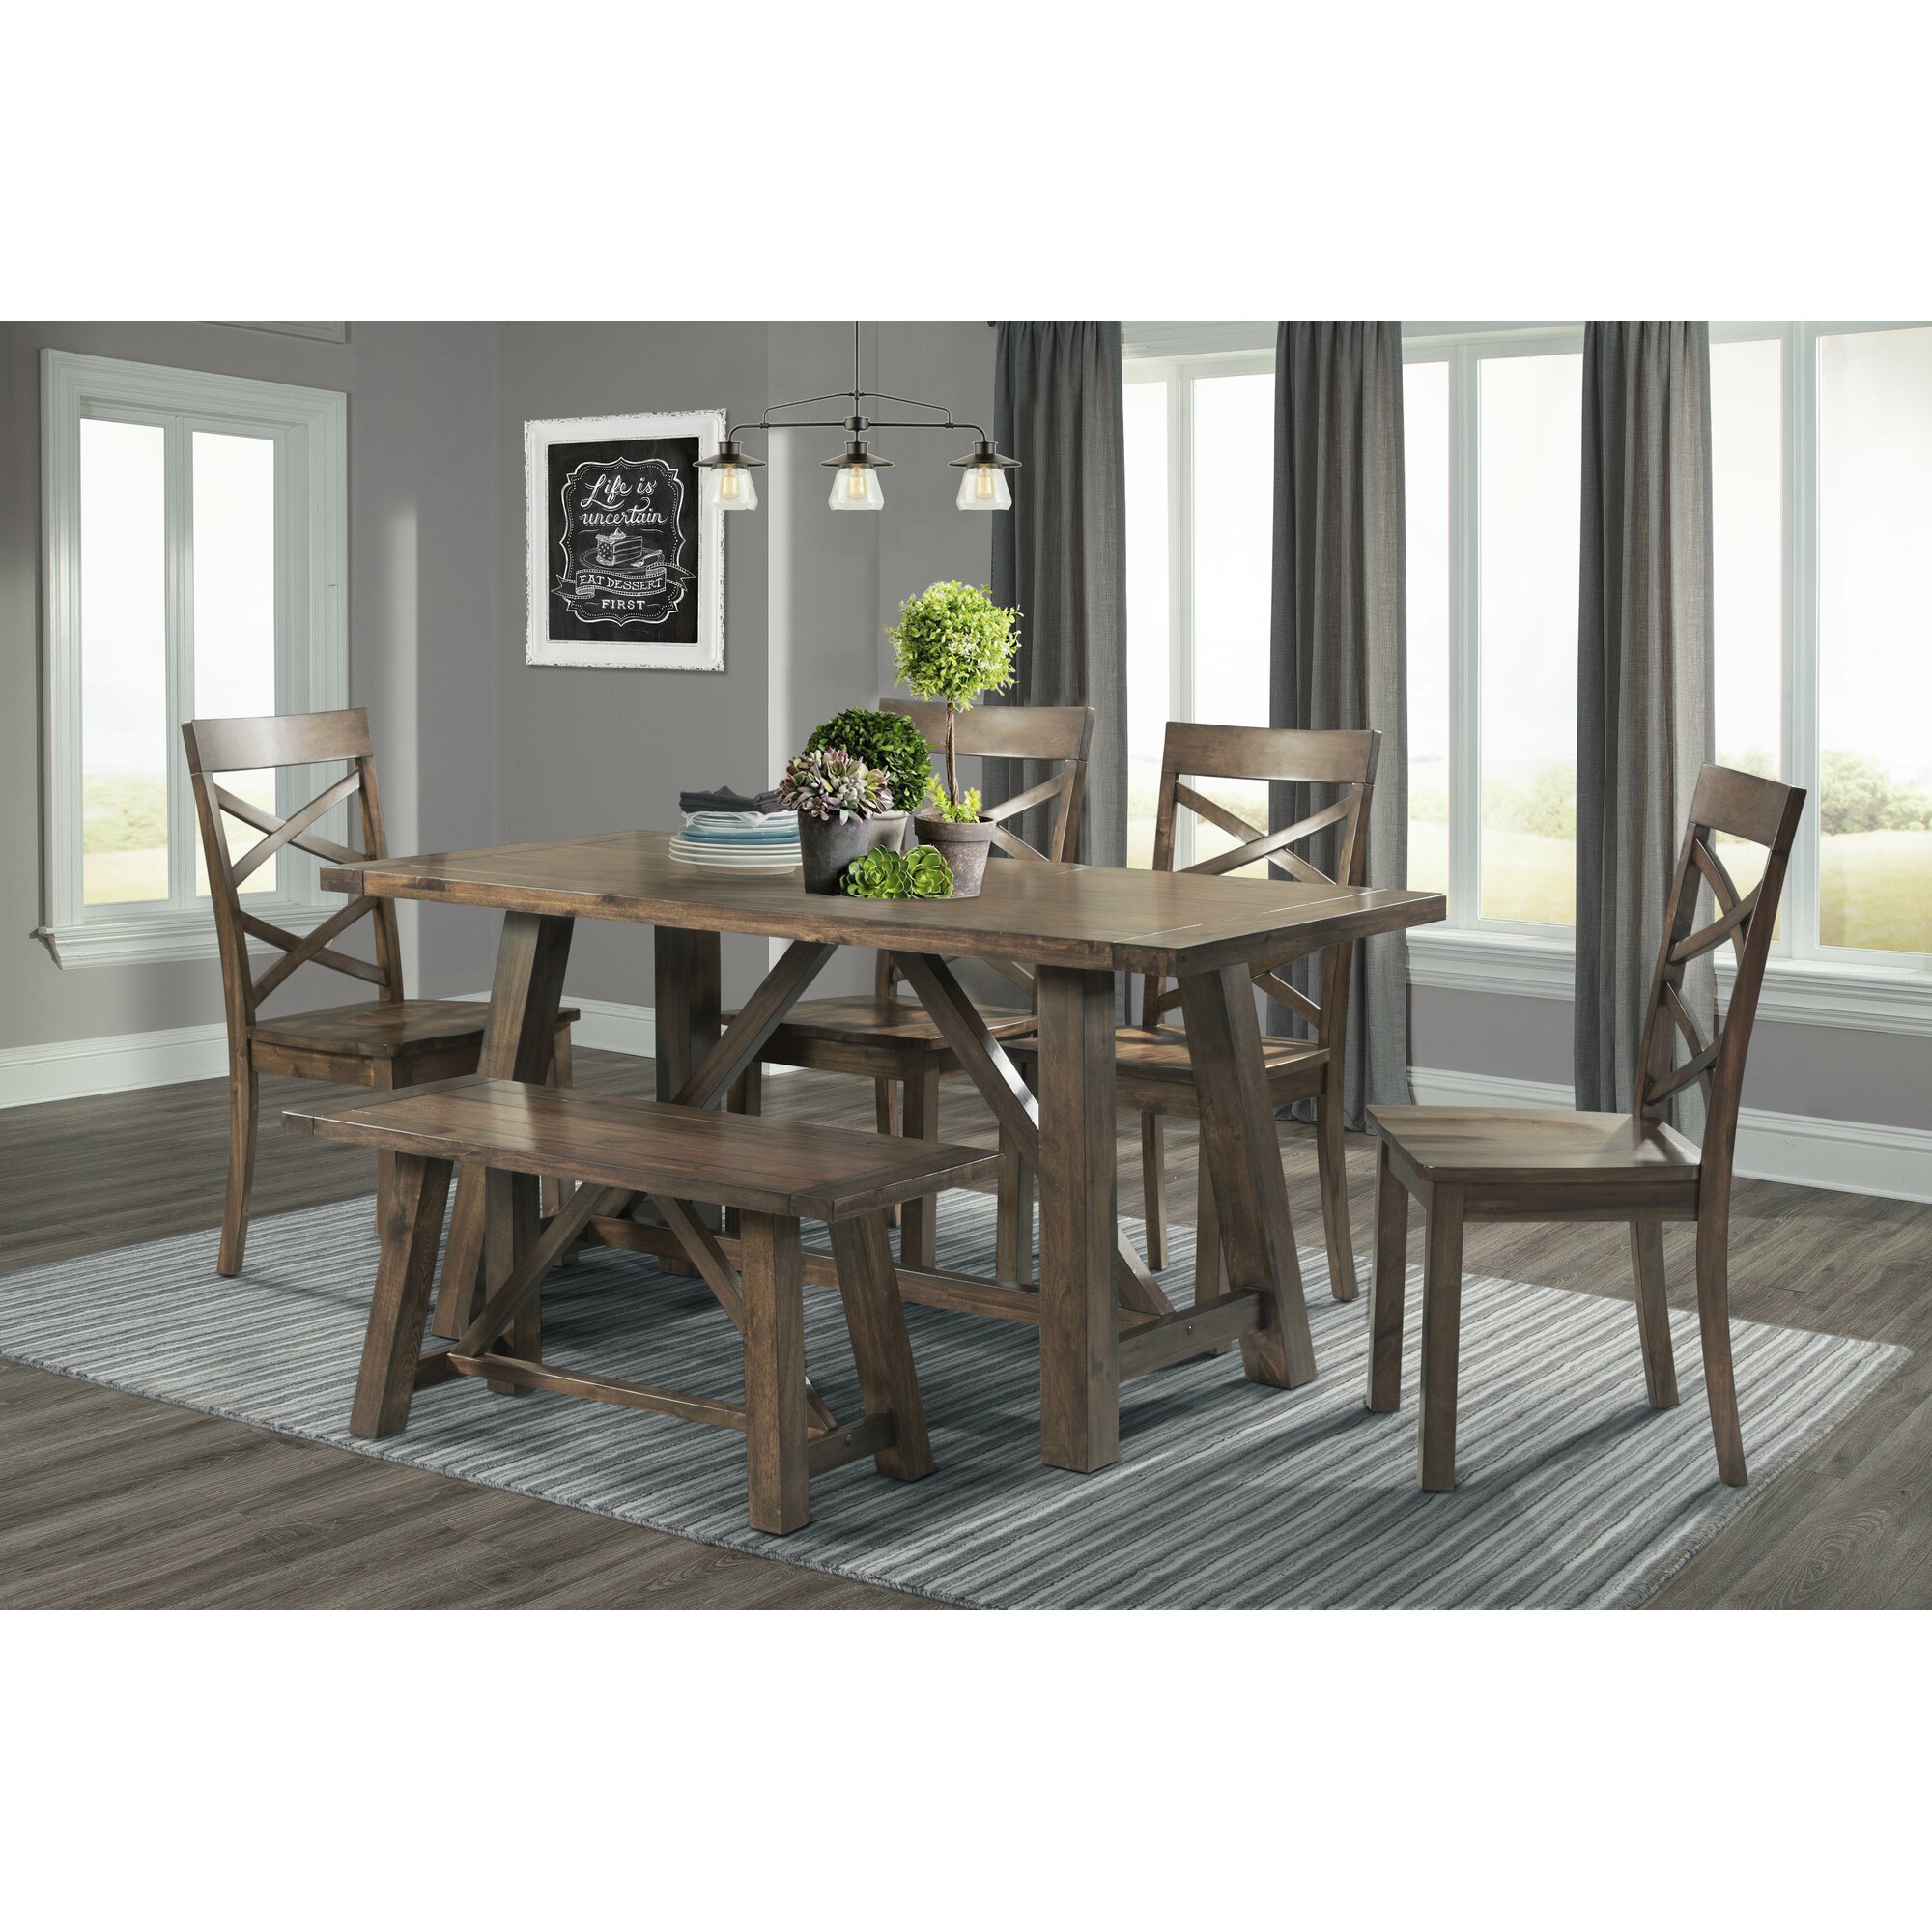 Bailee 6 Piece Solid Wood Dining Set